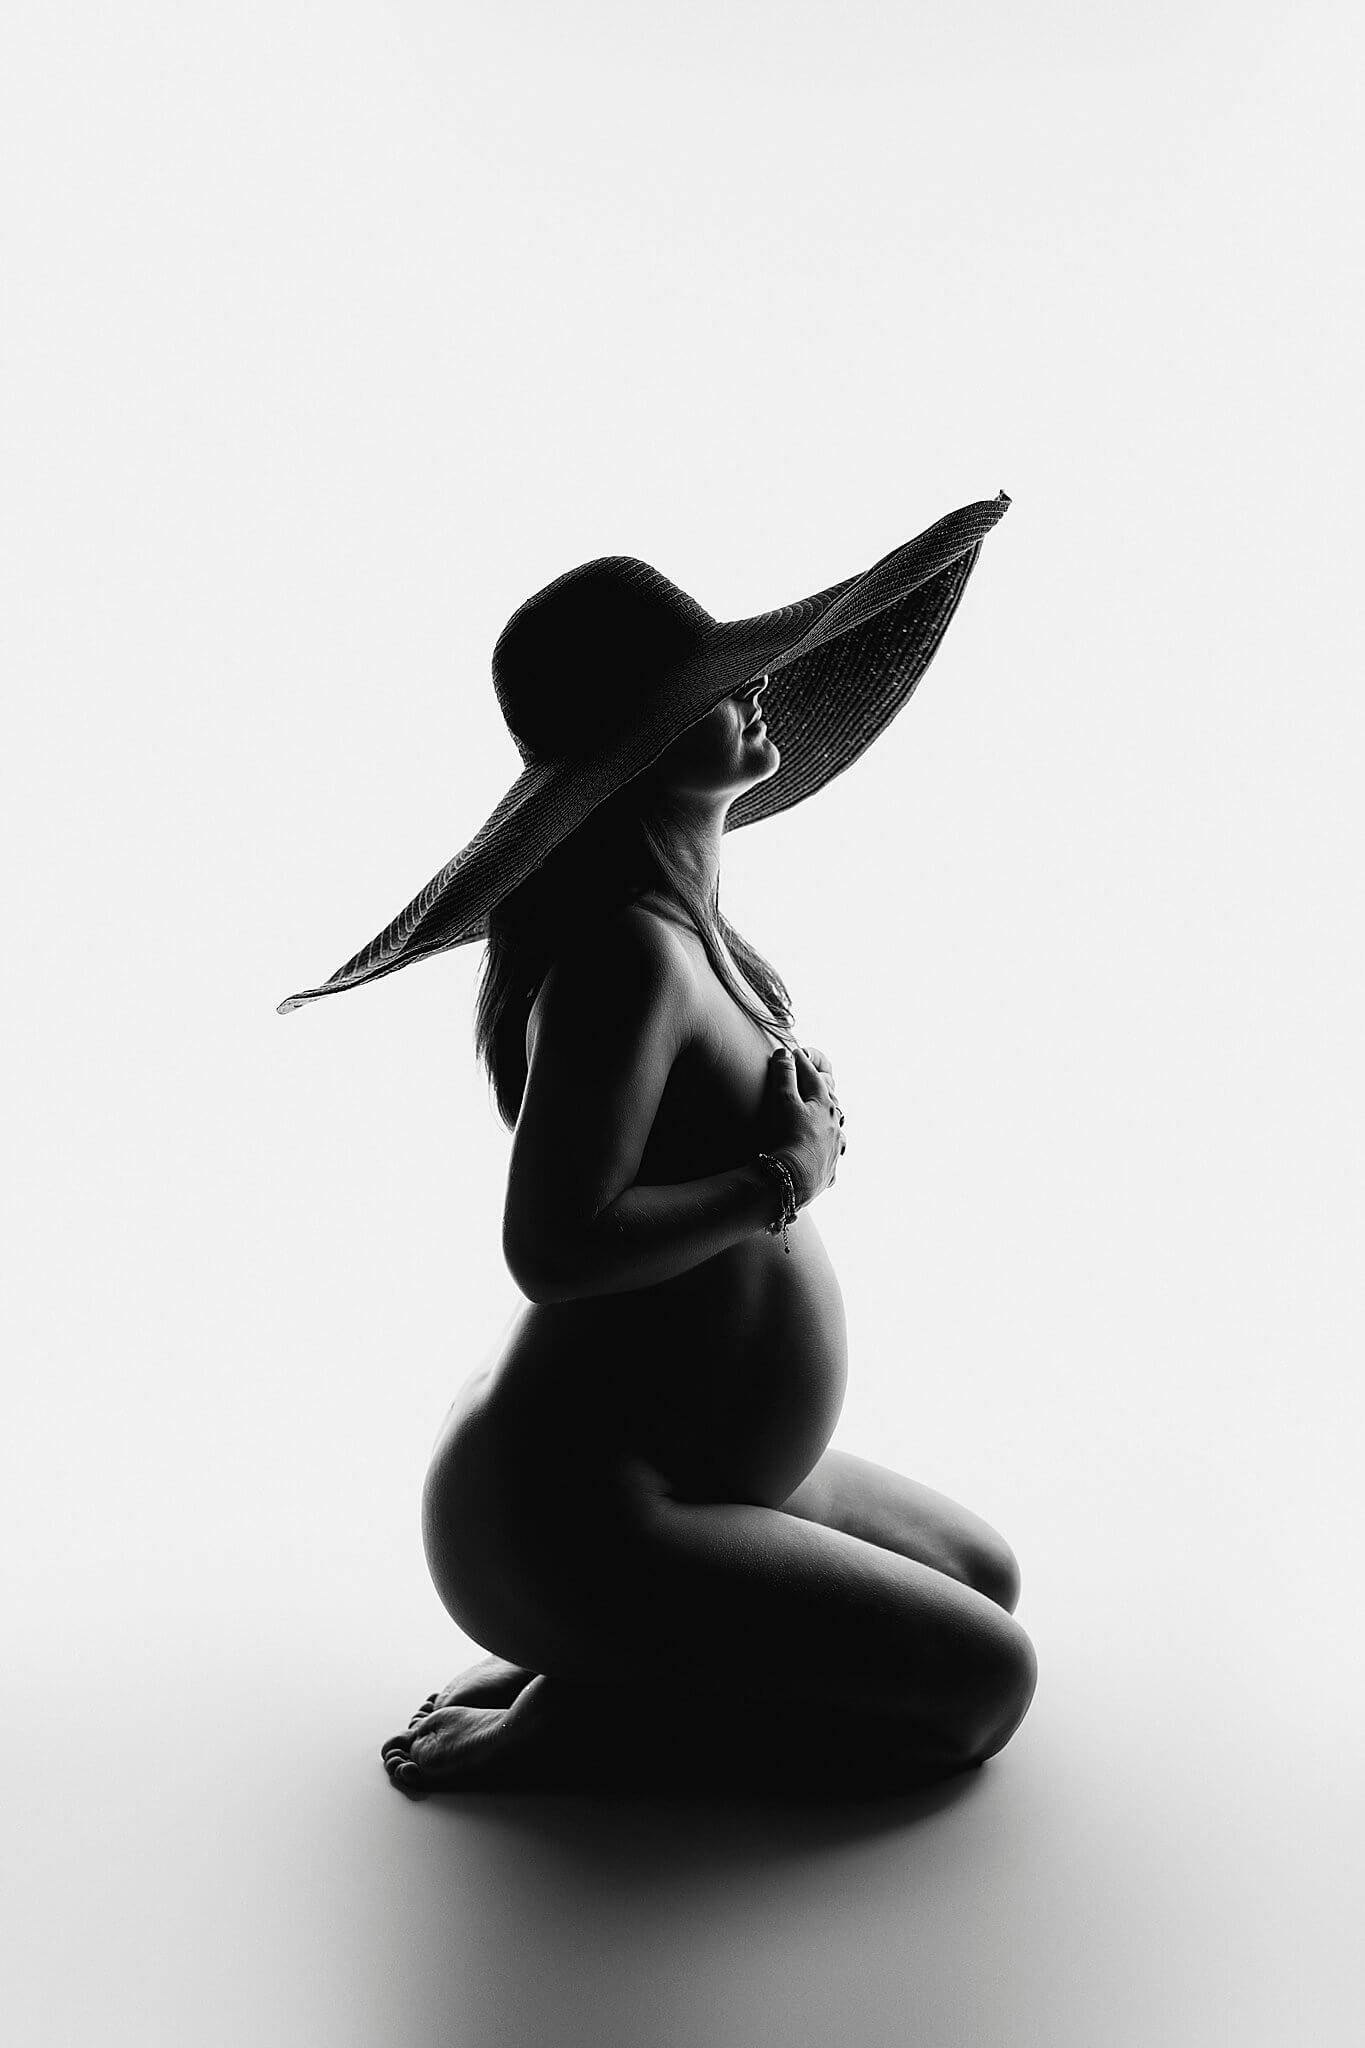 This is a black and white picture of a pregnant woman. The woman is sitting down on her knees and has a big black hat on her head. The hat is a real statement piece. 